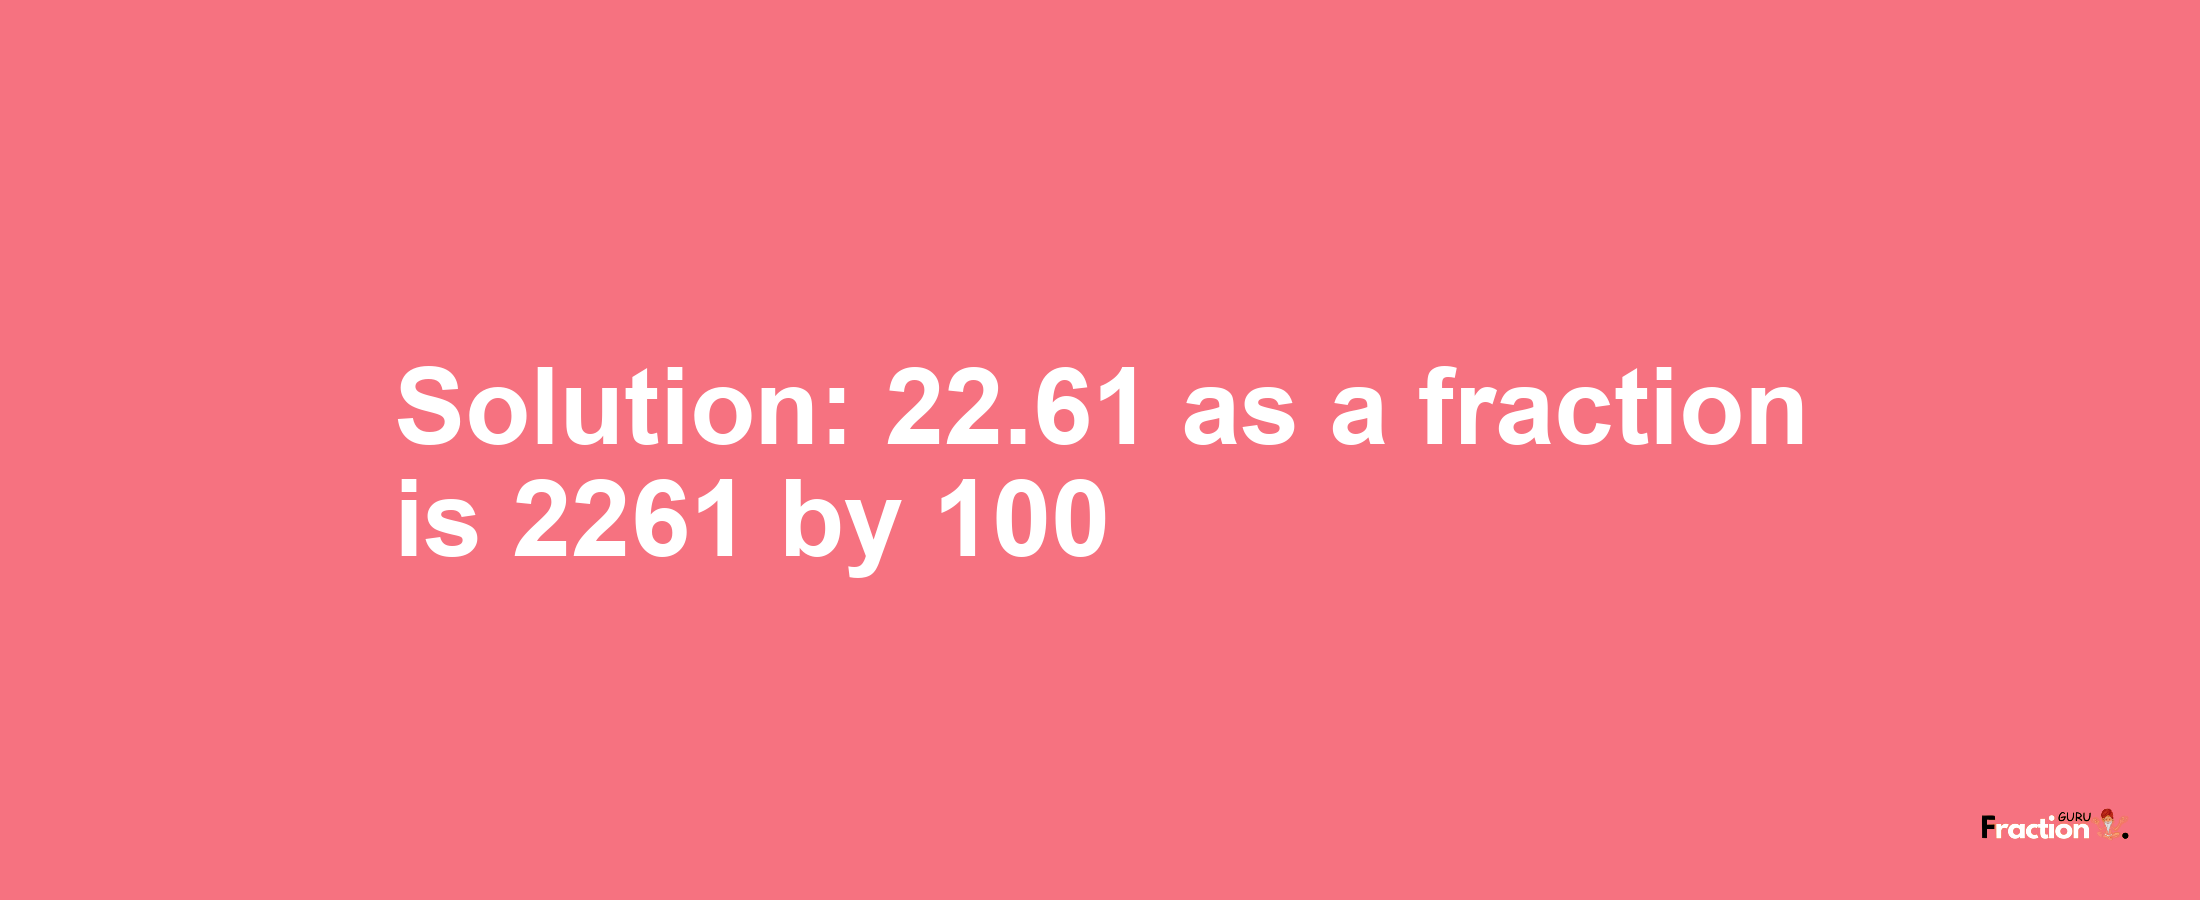 Solution:22.61 as a fraction is 2261/100